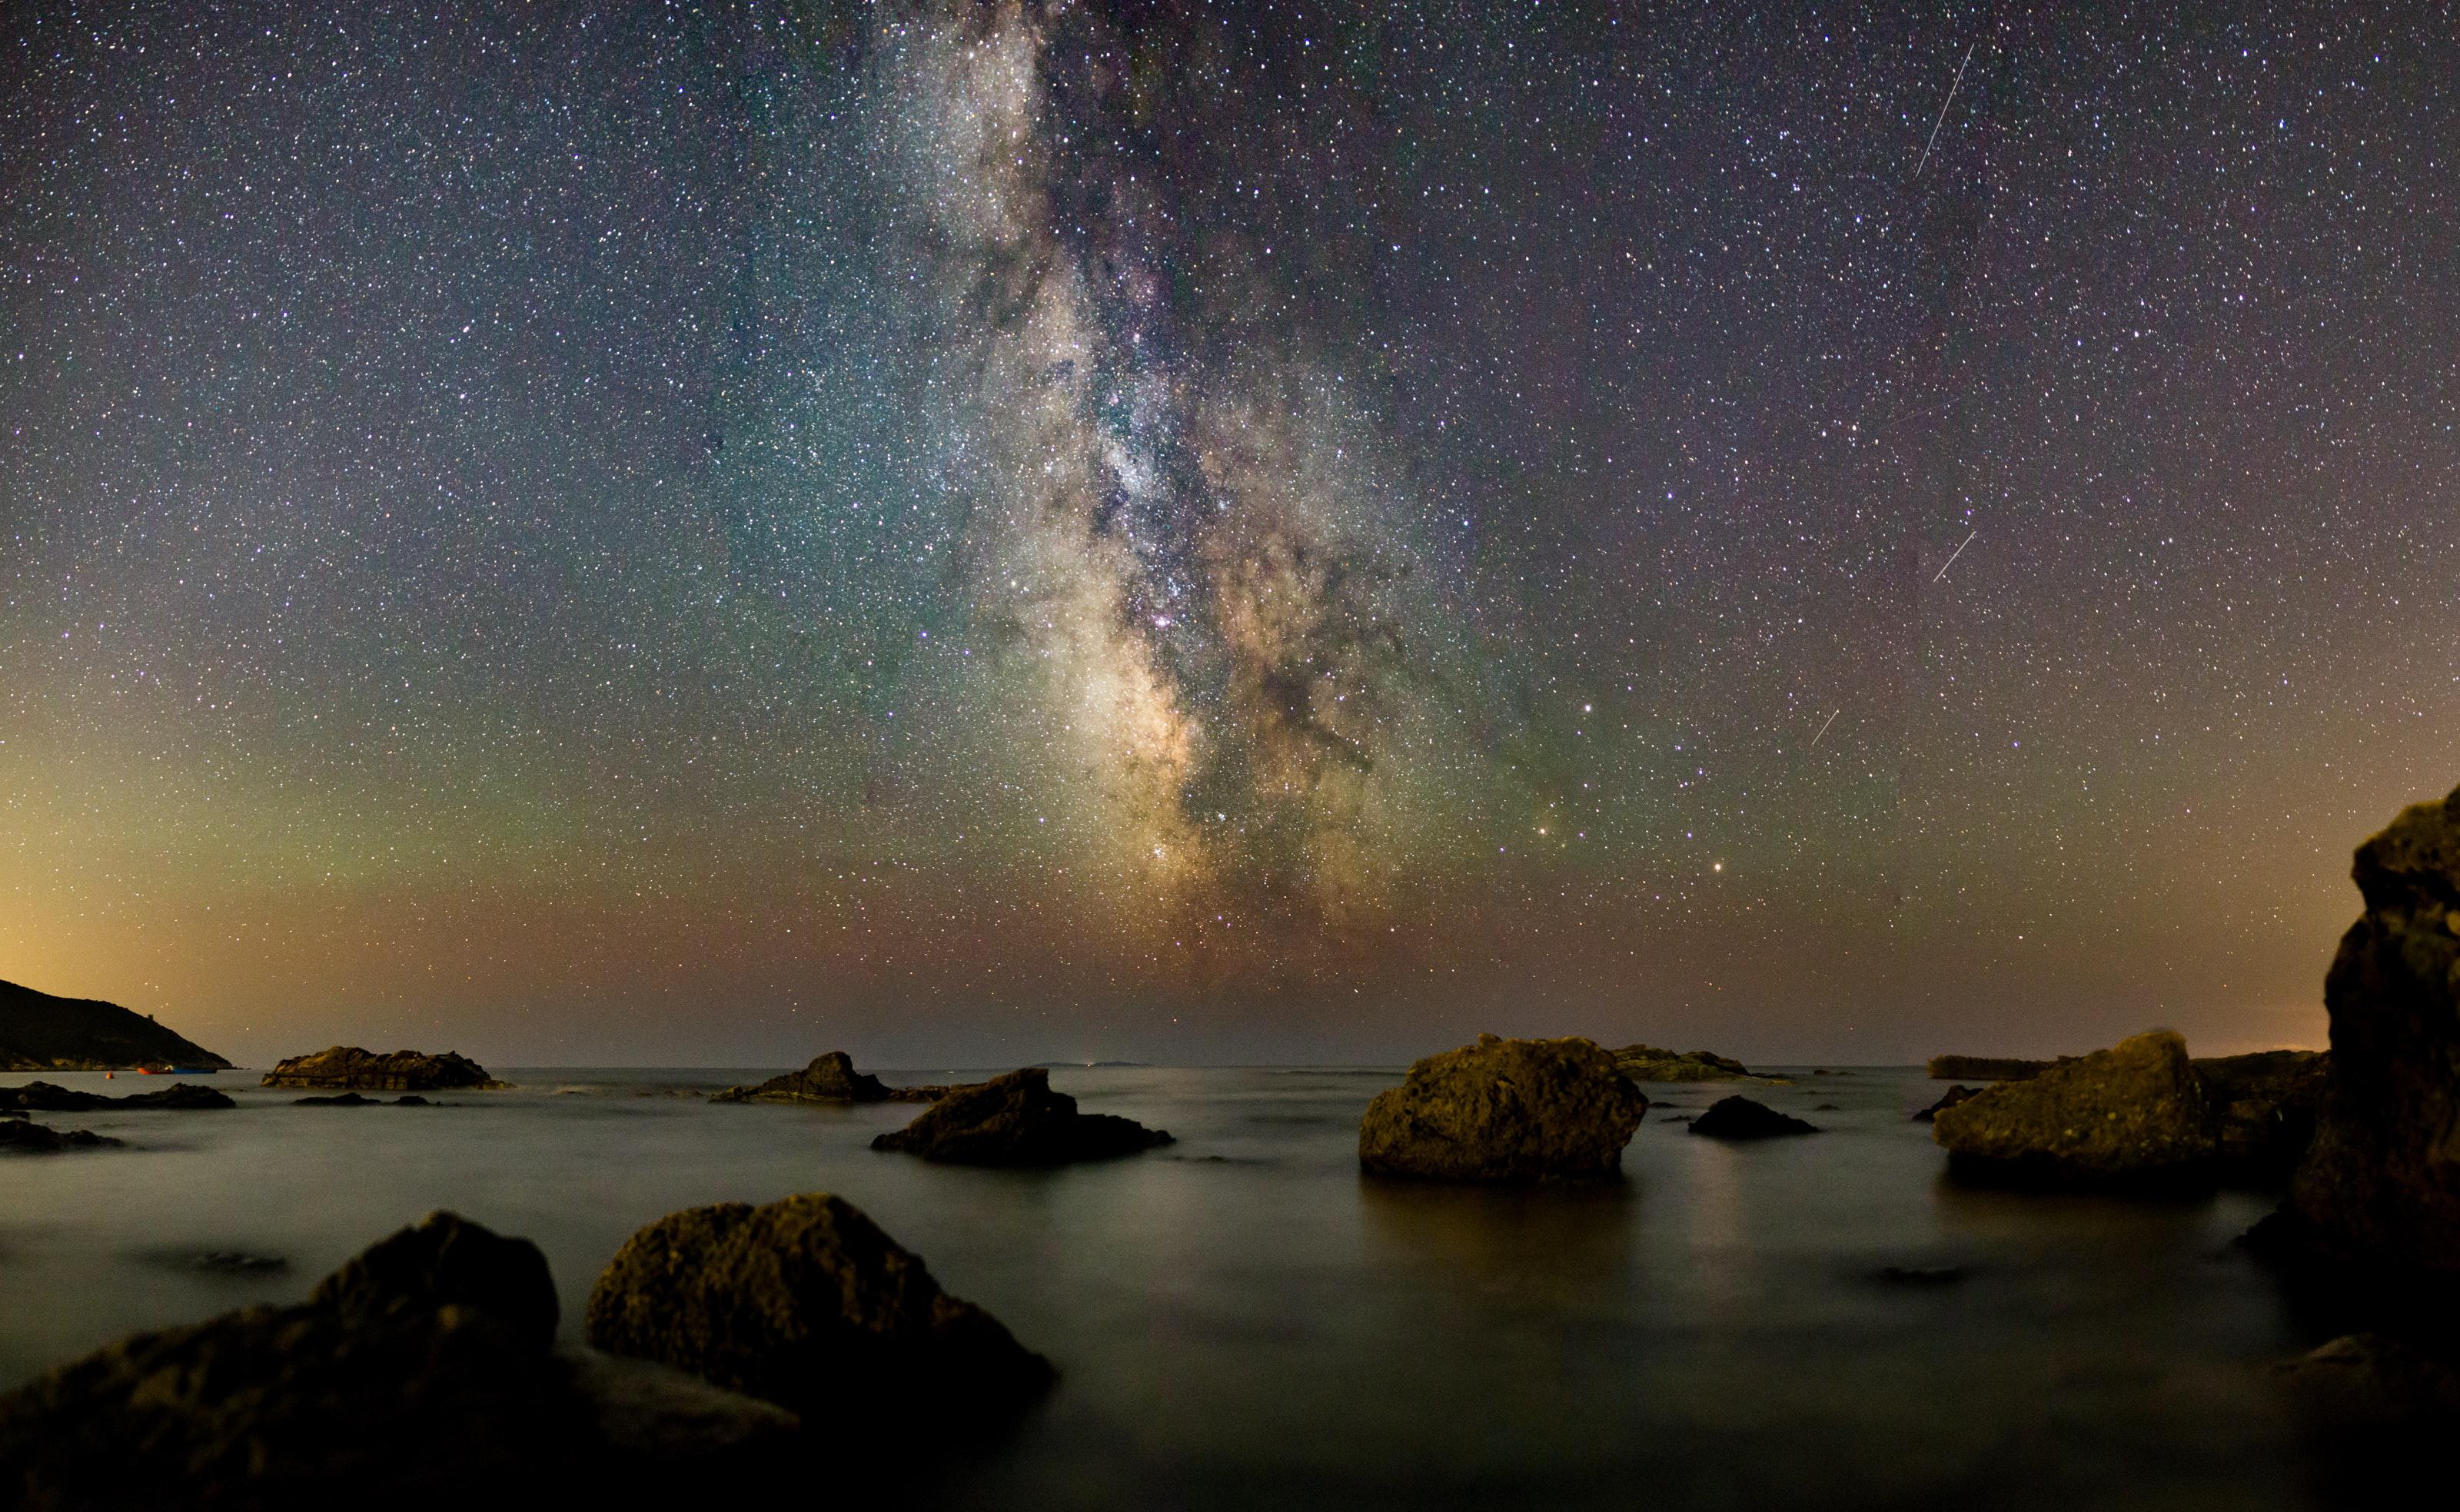 Photograph of rocks in water under a big sky full of stars and showing the Milky Way.